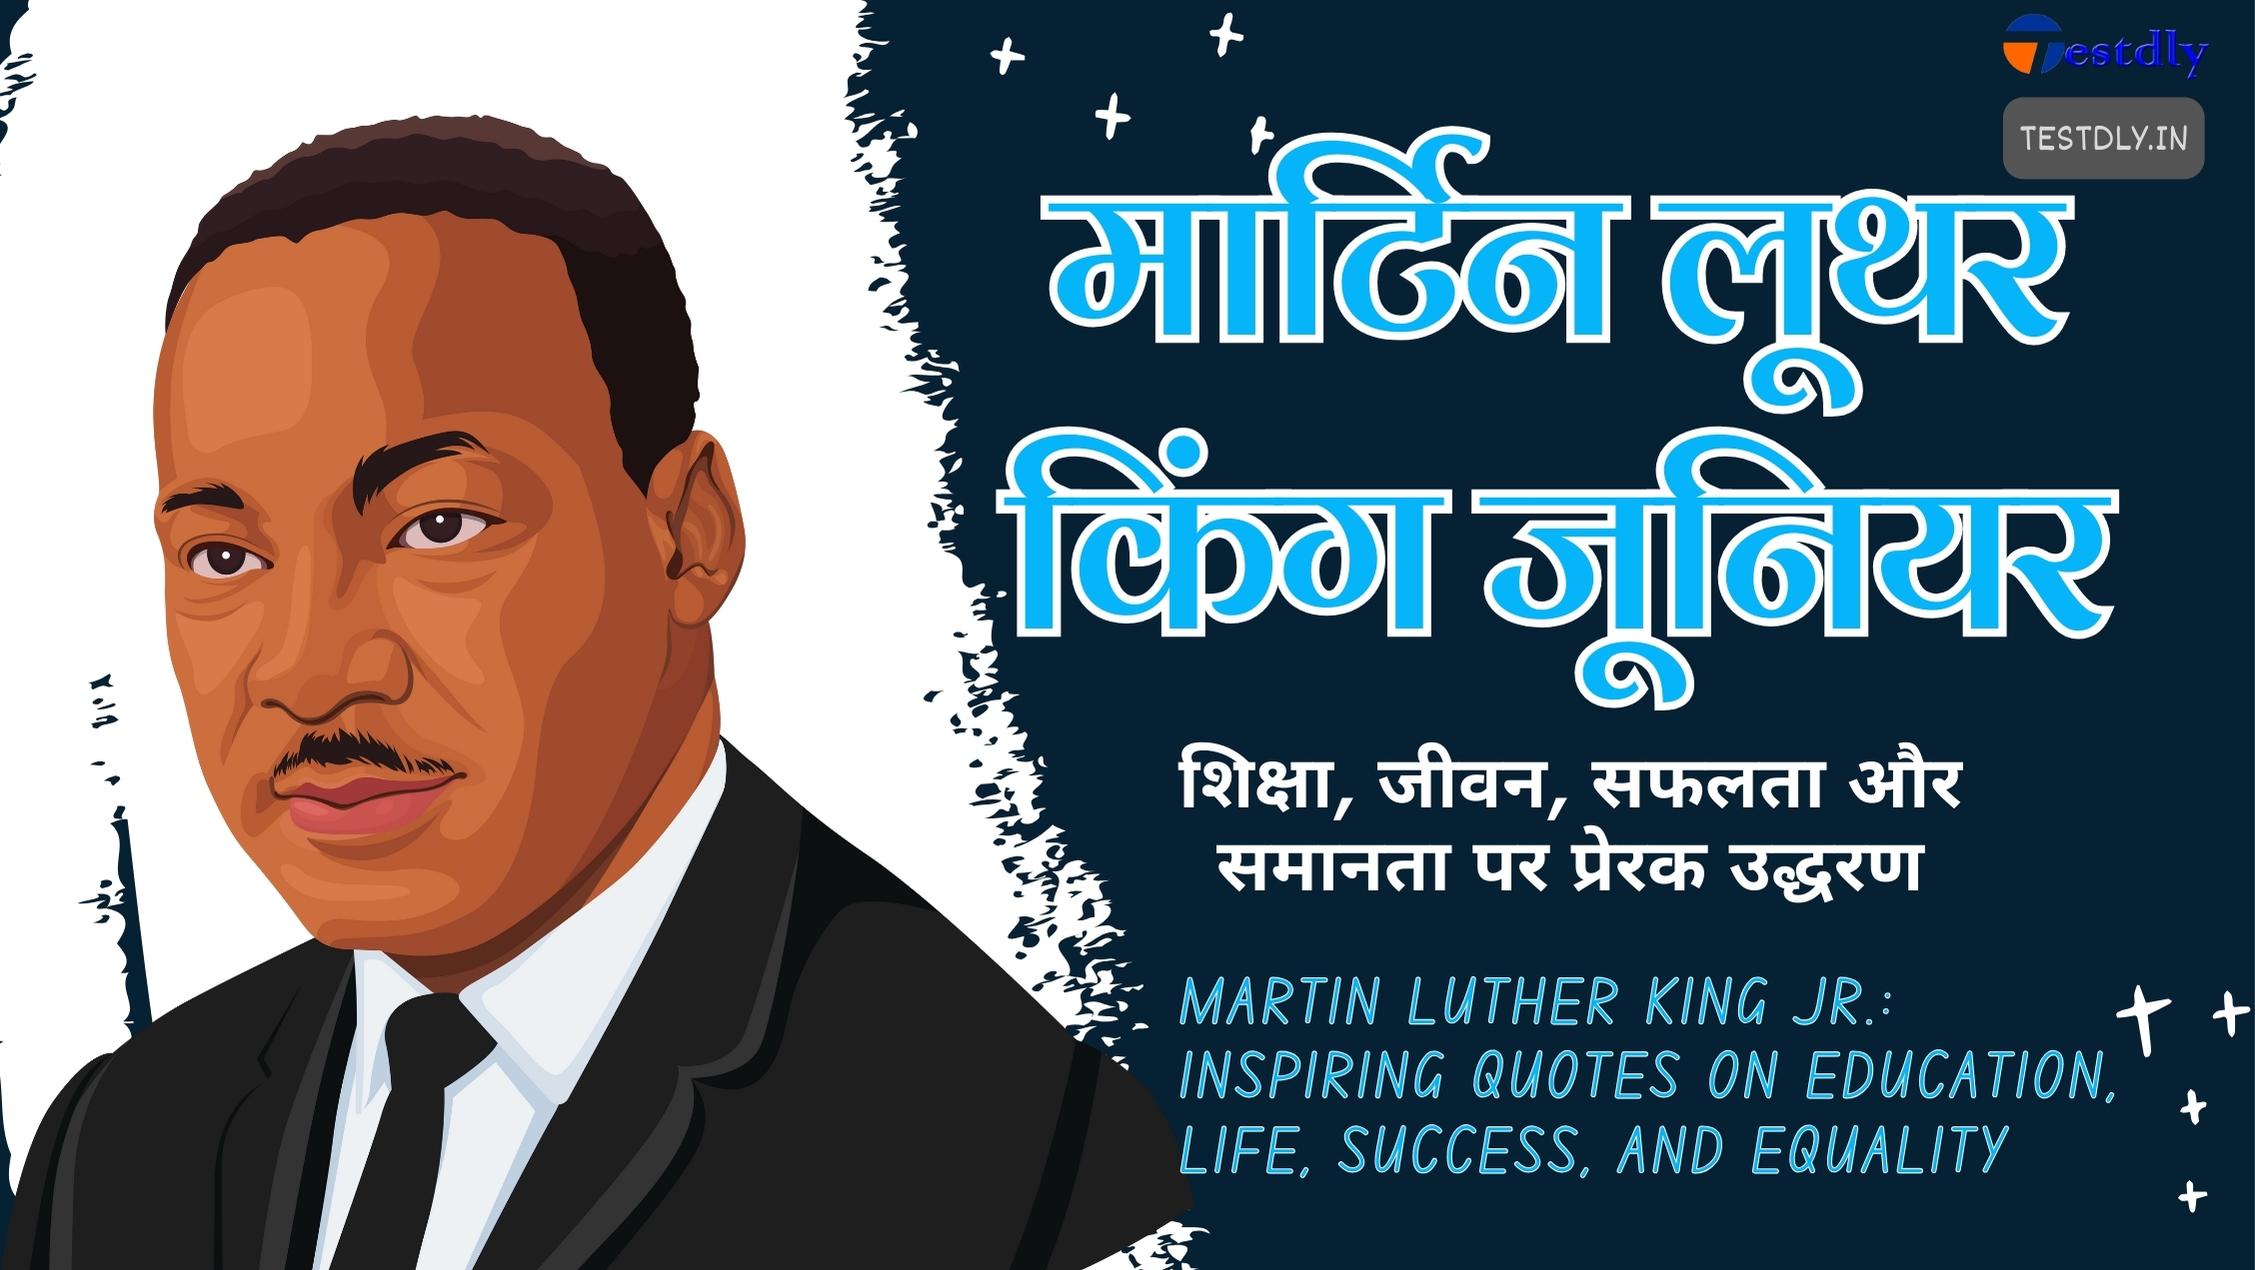 Martin Luther King Jr.: Inspiring Quotes on Education, Life, Success, and Equality